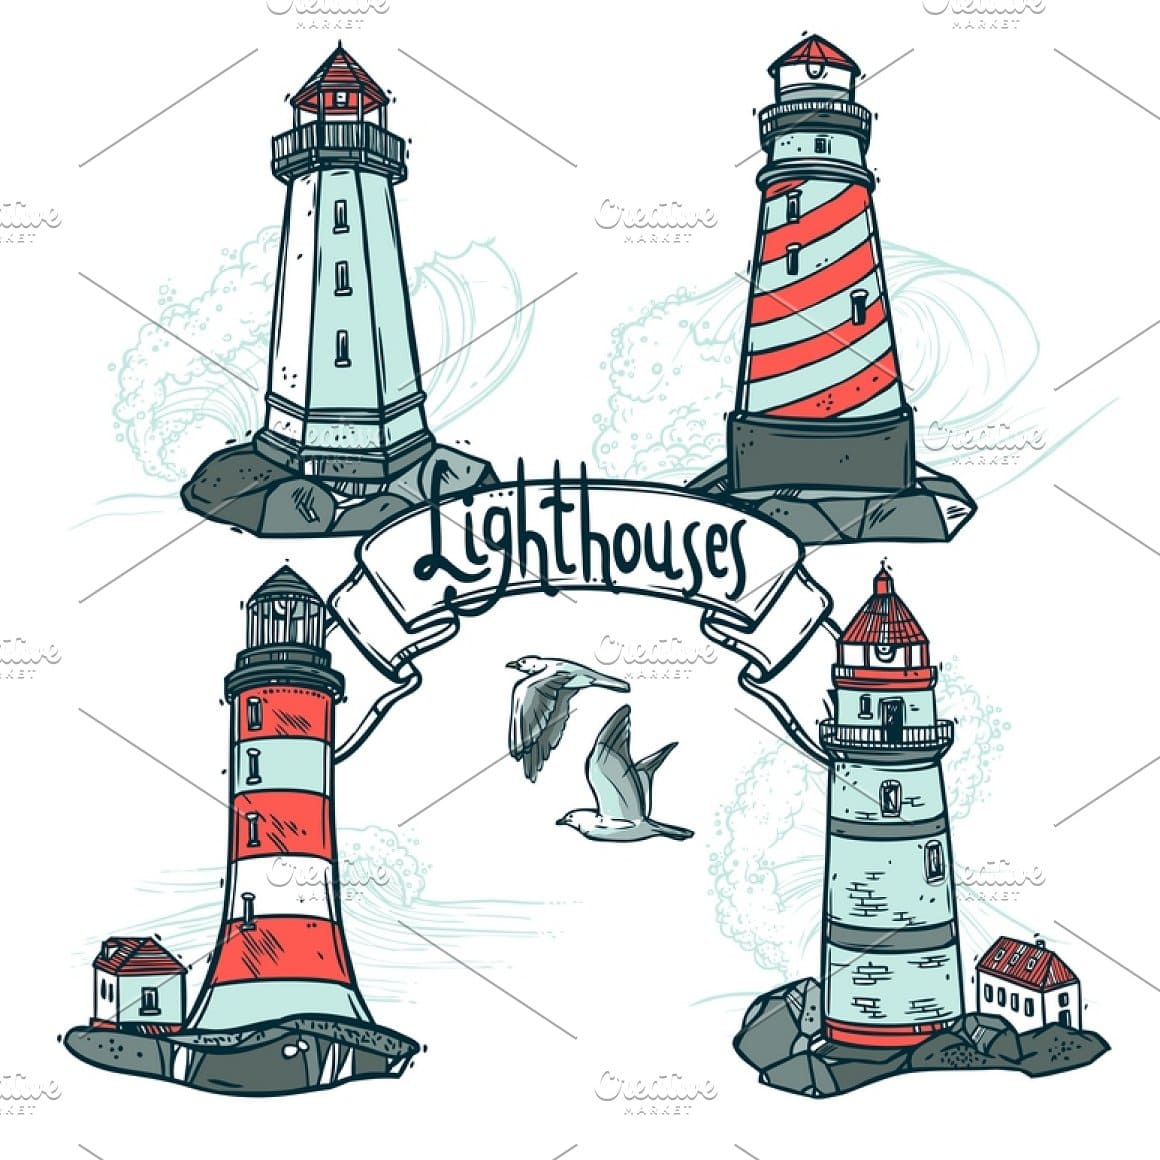 Lighthouse sketch set with seagulls and sea waves on background vector illustration.